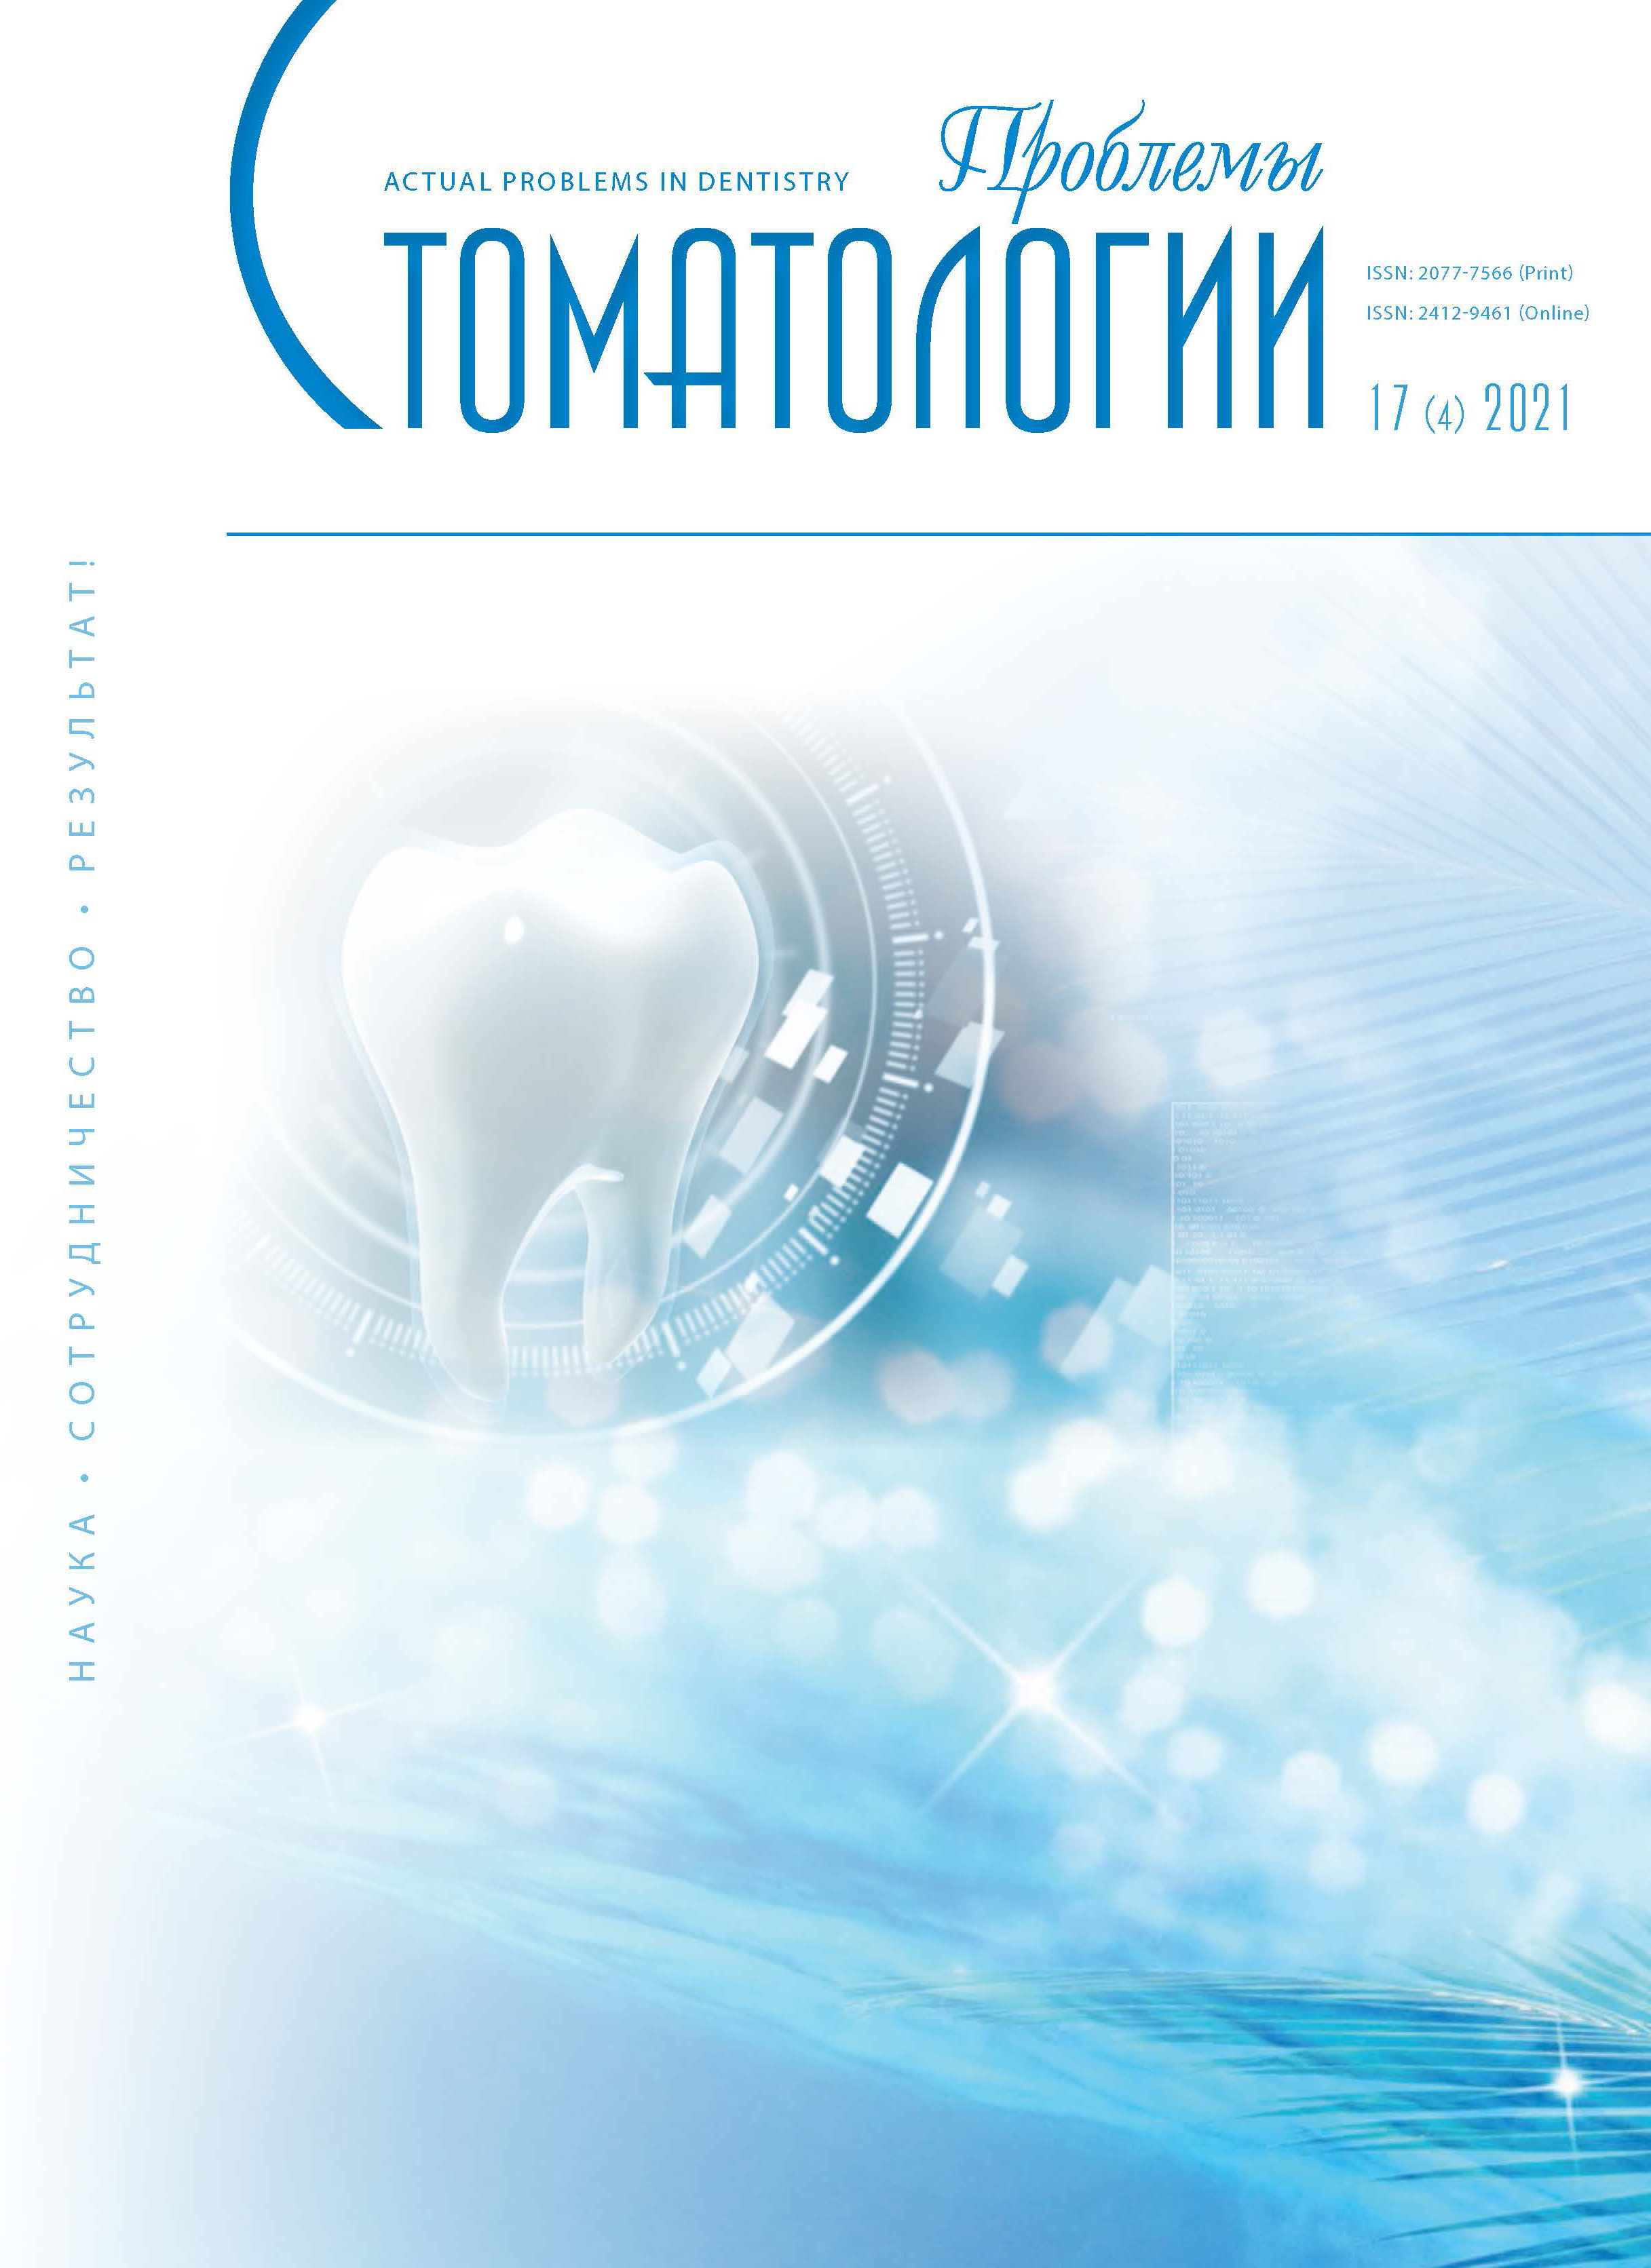                         COMPREHENSIVE STUDY OF DENTAL ORTHOPEDIC MORBIDITY IN PEOPLE CONSIDERED AS LONG-LIVING PERSONS AND THE WAYS TO ELIMINATE IT
            